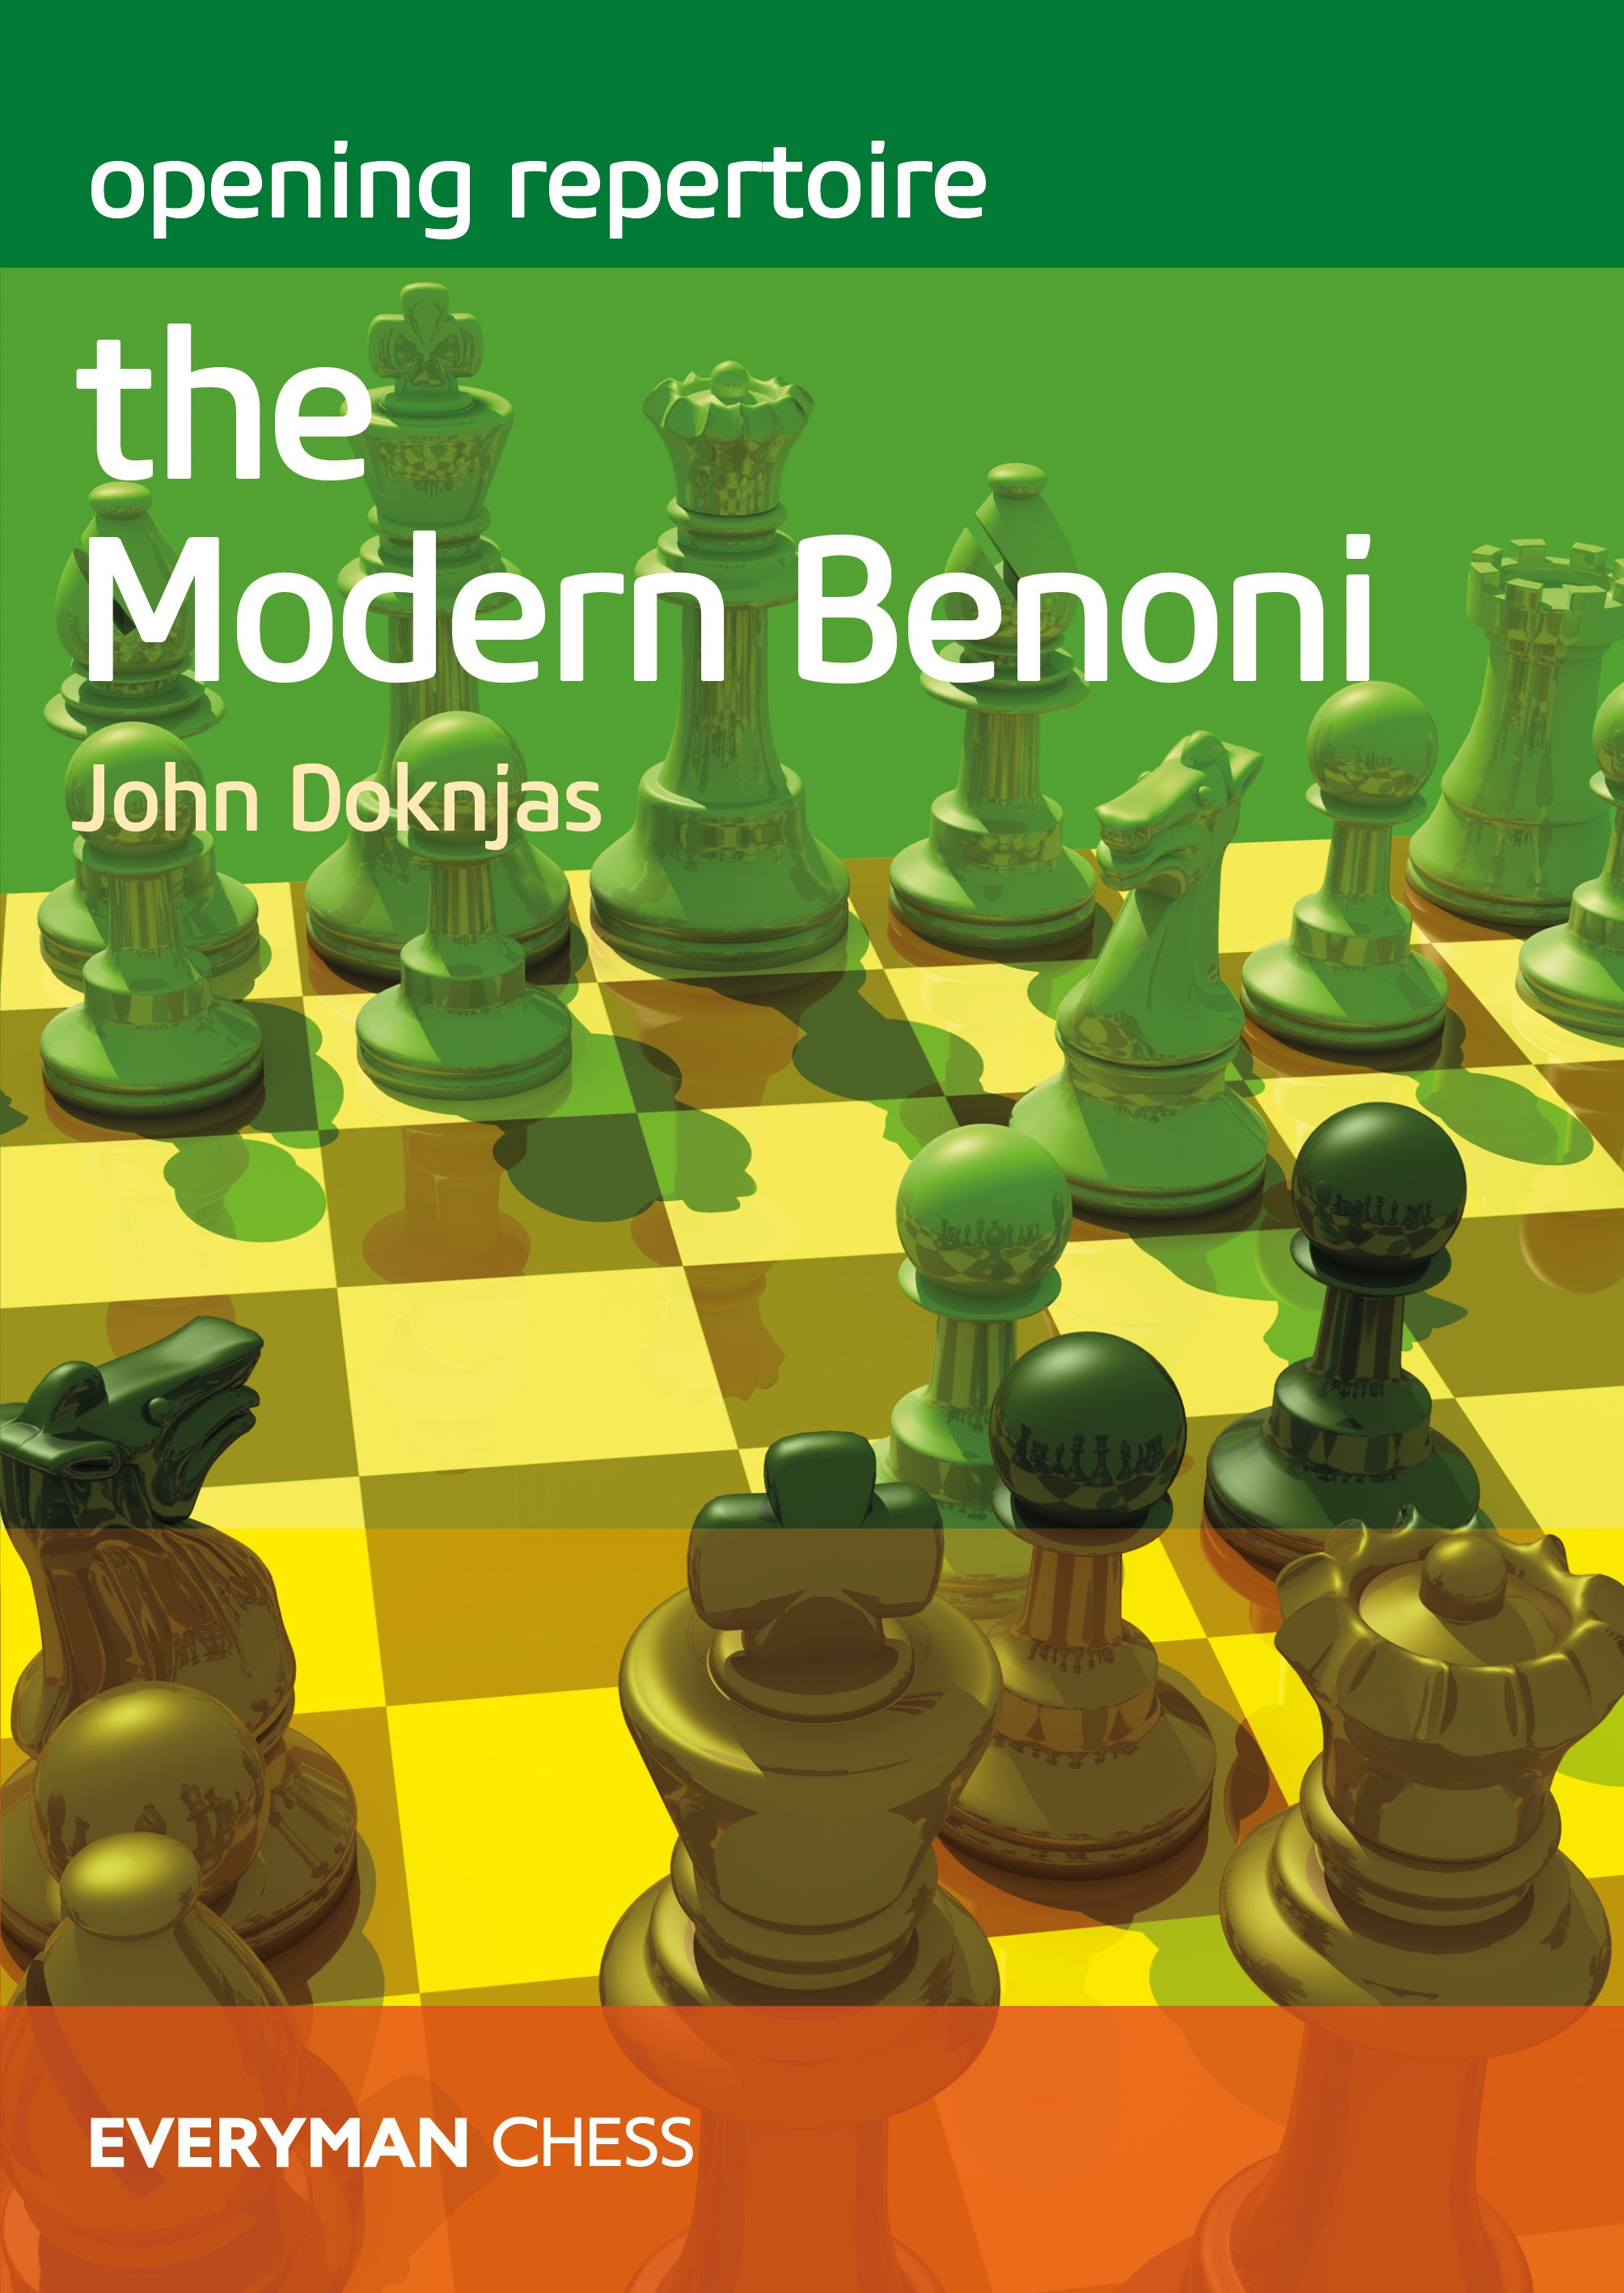 Chess openings: Old Benoni (A43)